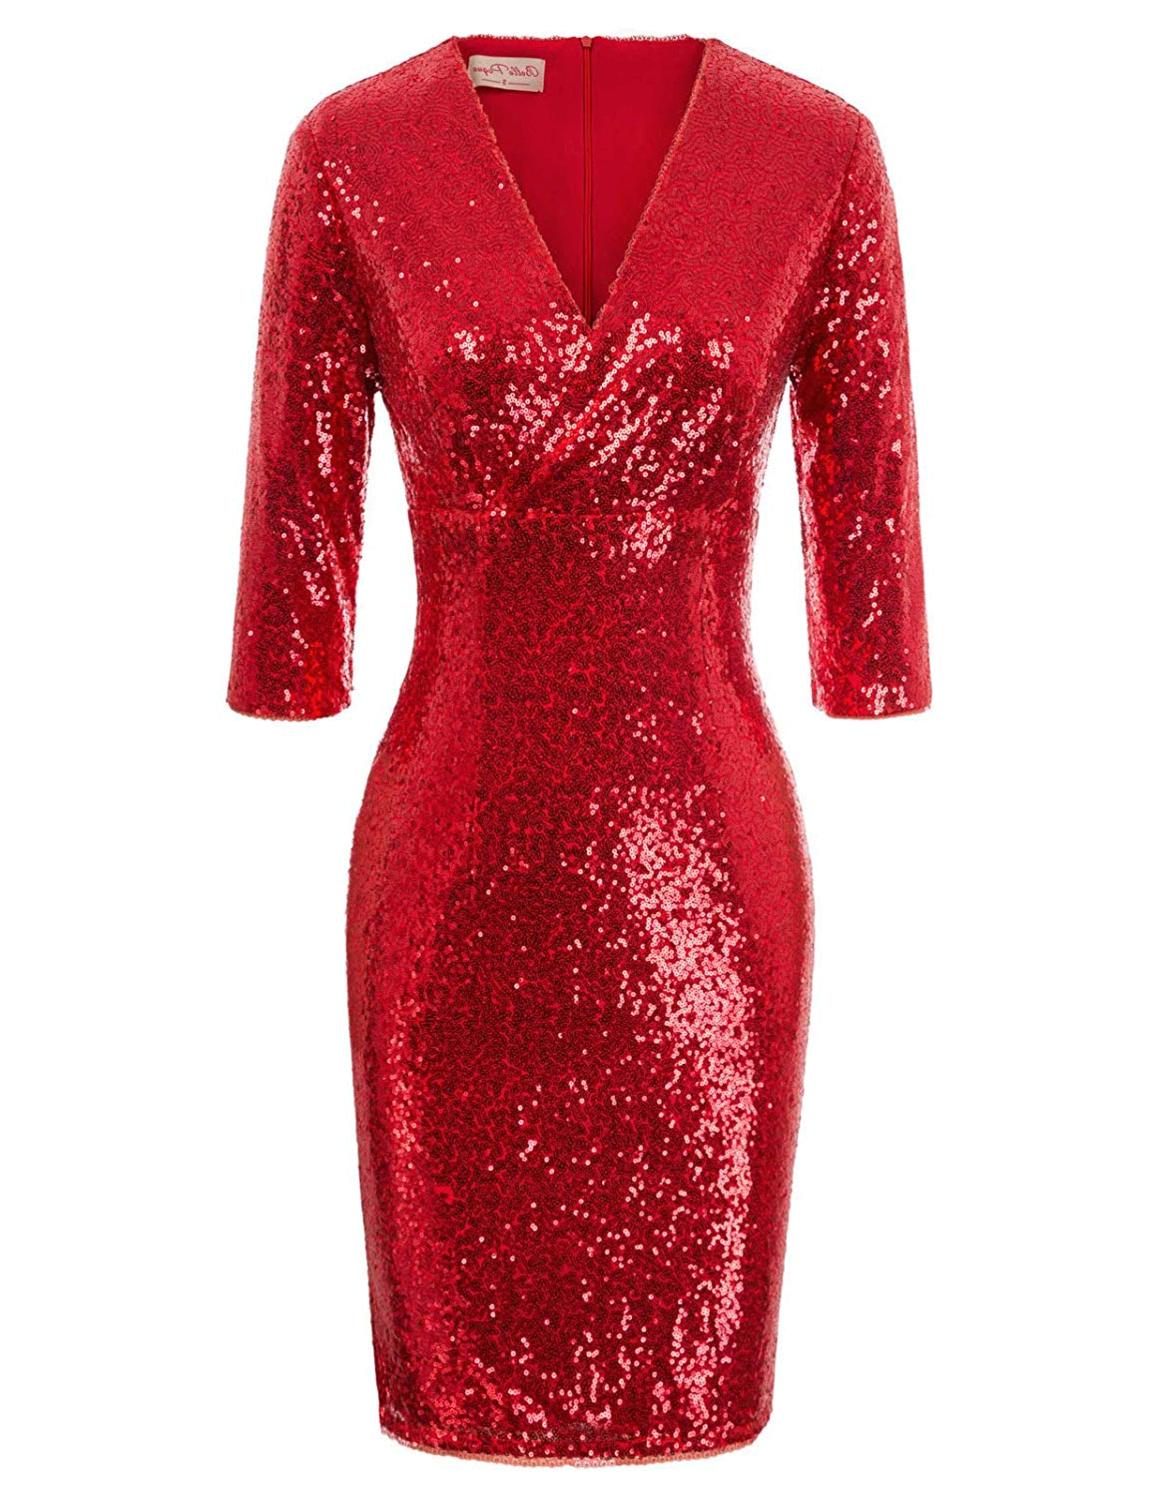 Bodycon Sequin Dresses for Women Vintage 3/4 Sleeve Sparkling, Red ...